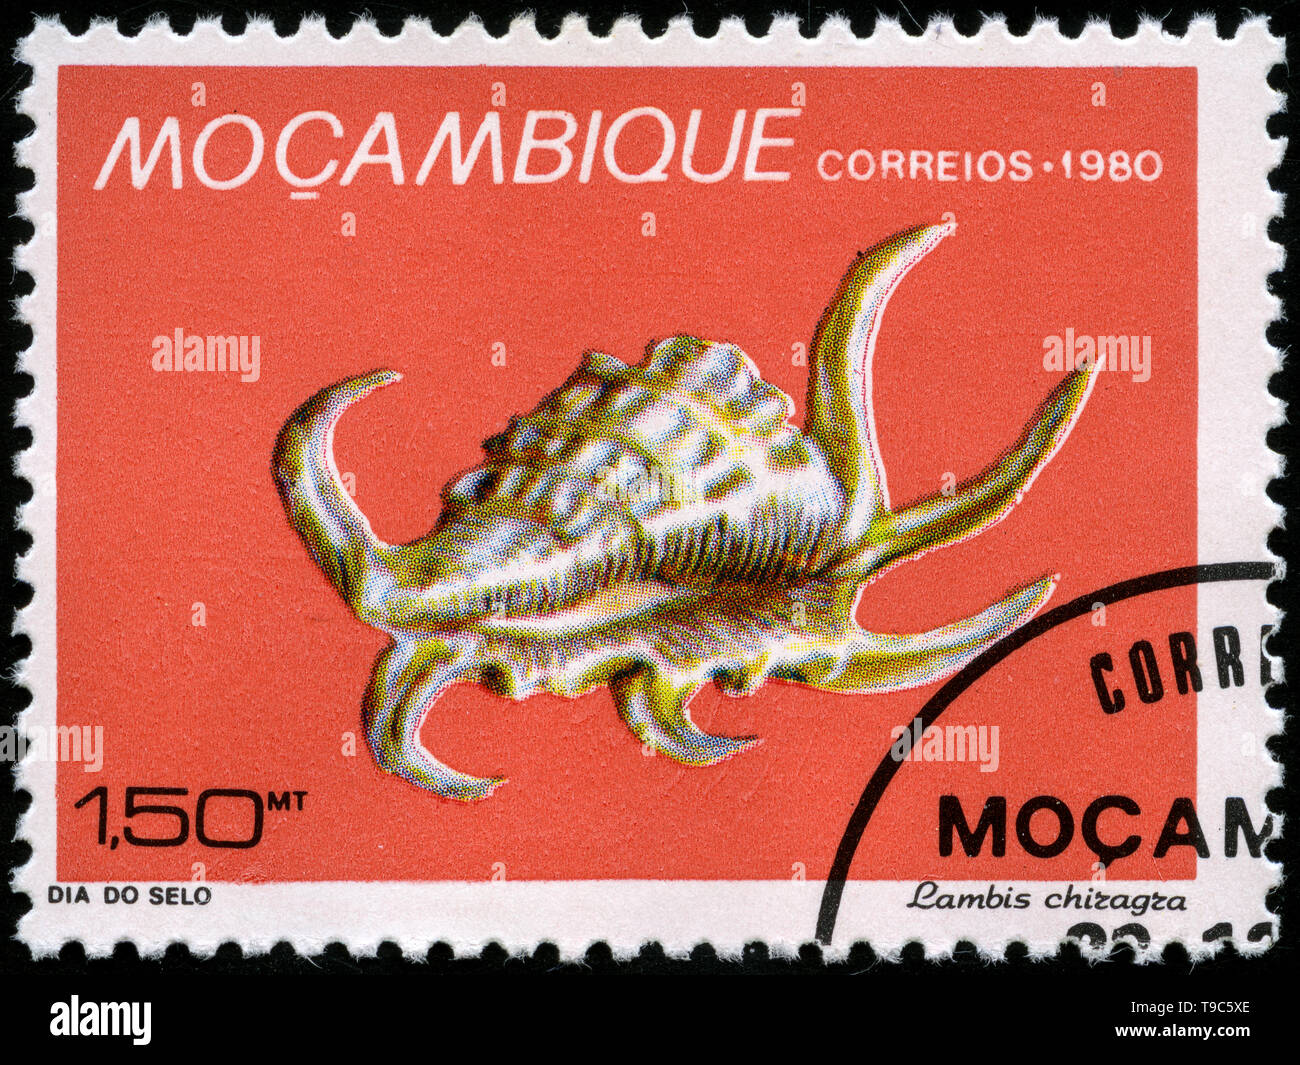 Postage stamp from Mozambique in the Day of the Stamp - Marine Shells of Mozambique series issued in 1980 Stock Photo